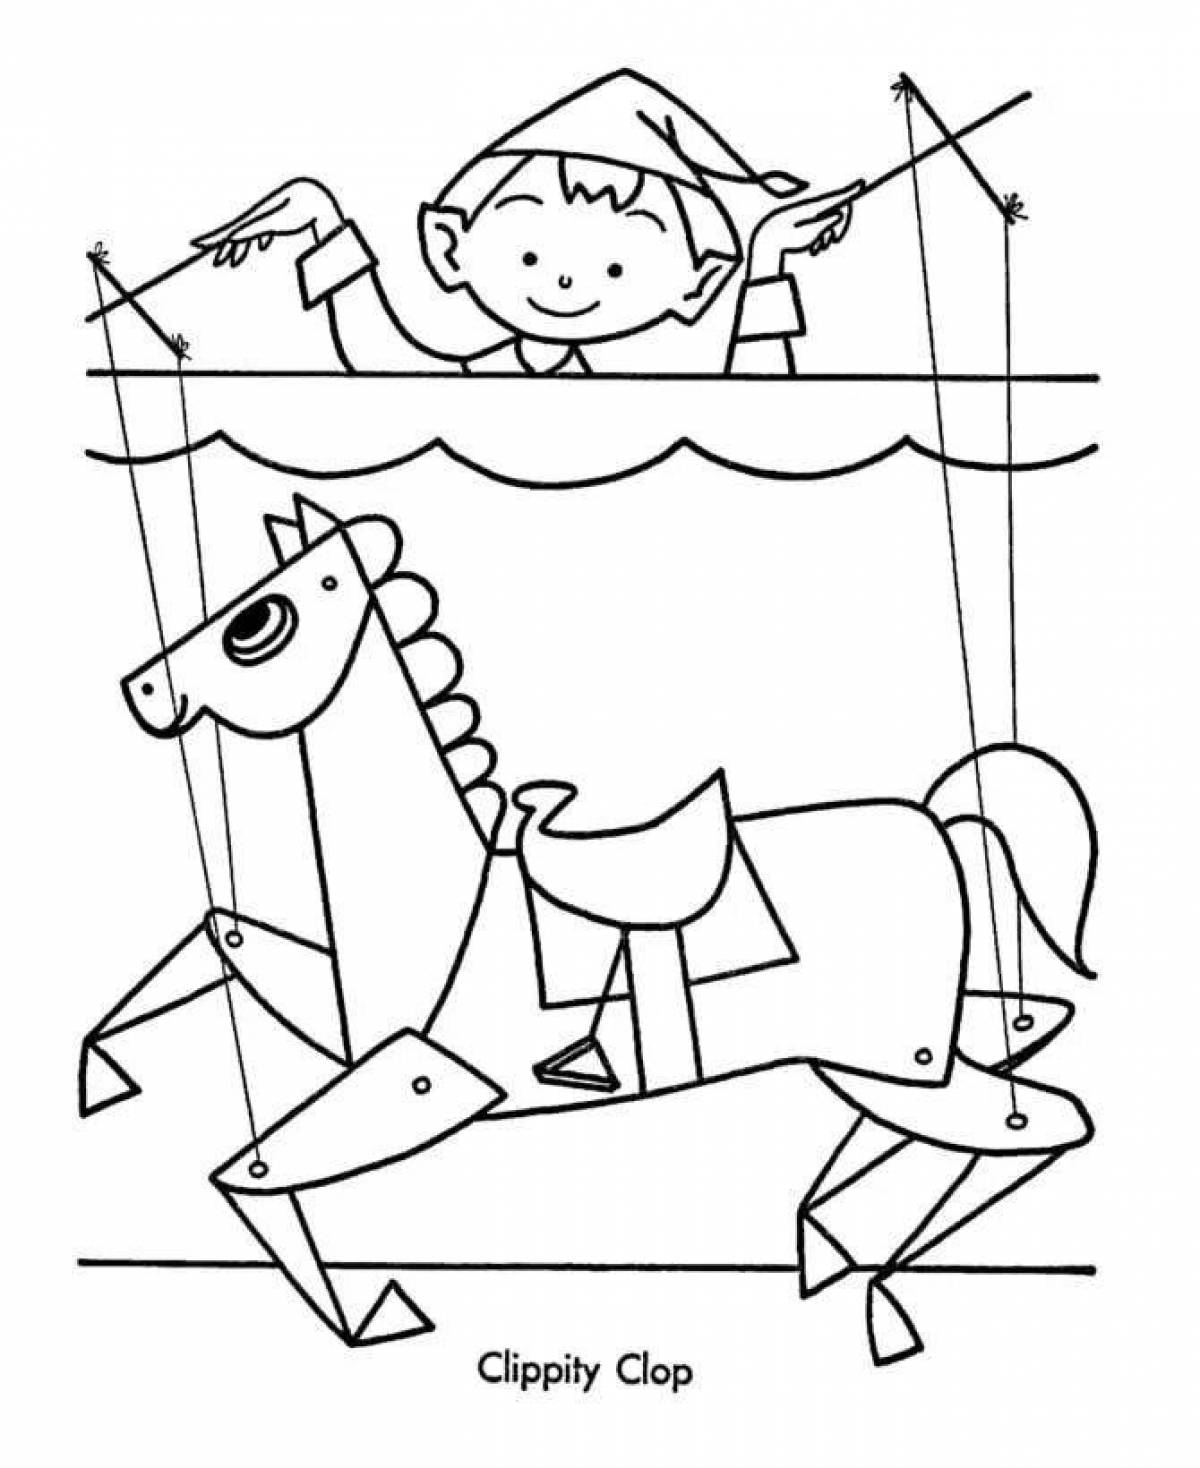 Puppet theater coloring page with color content